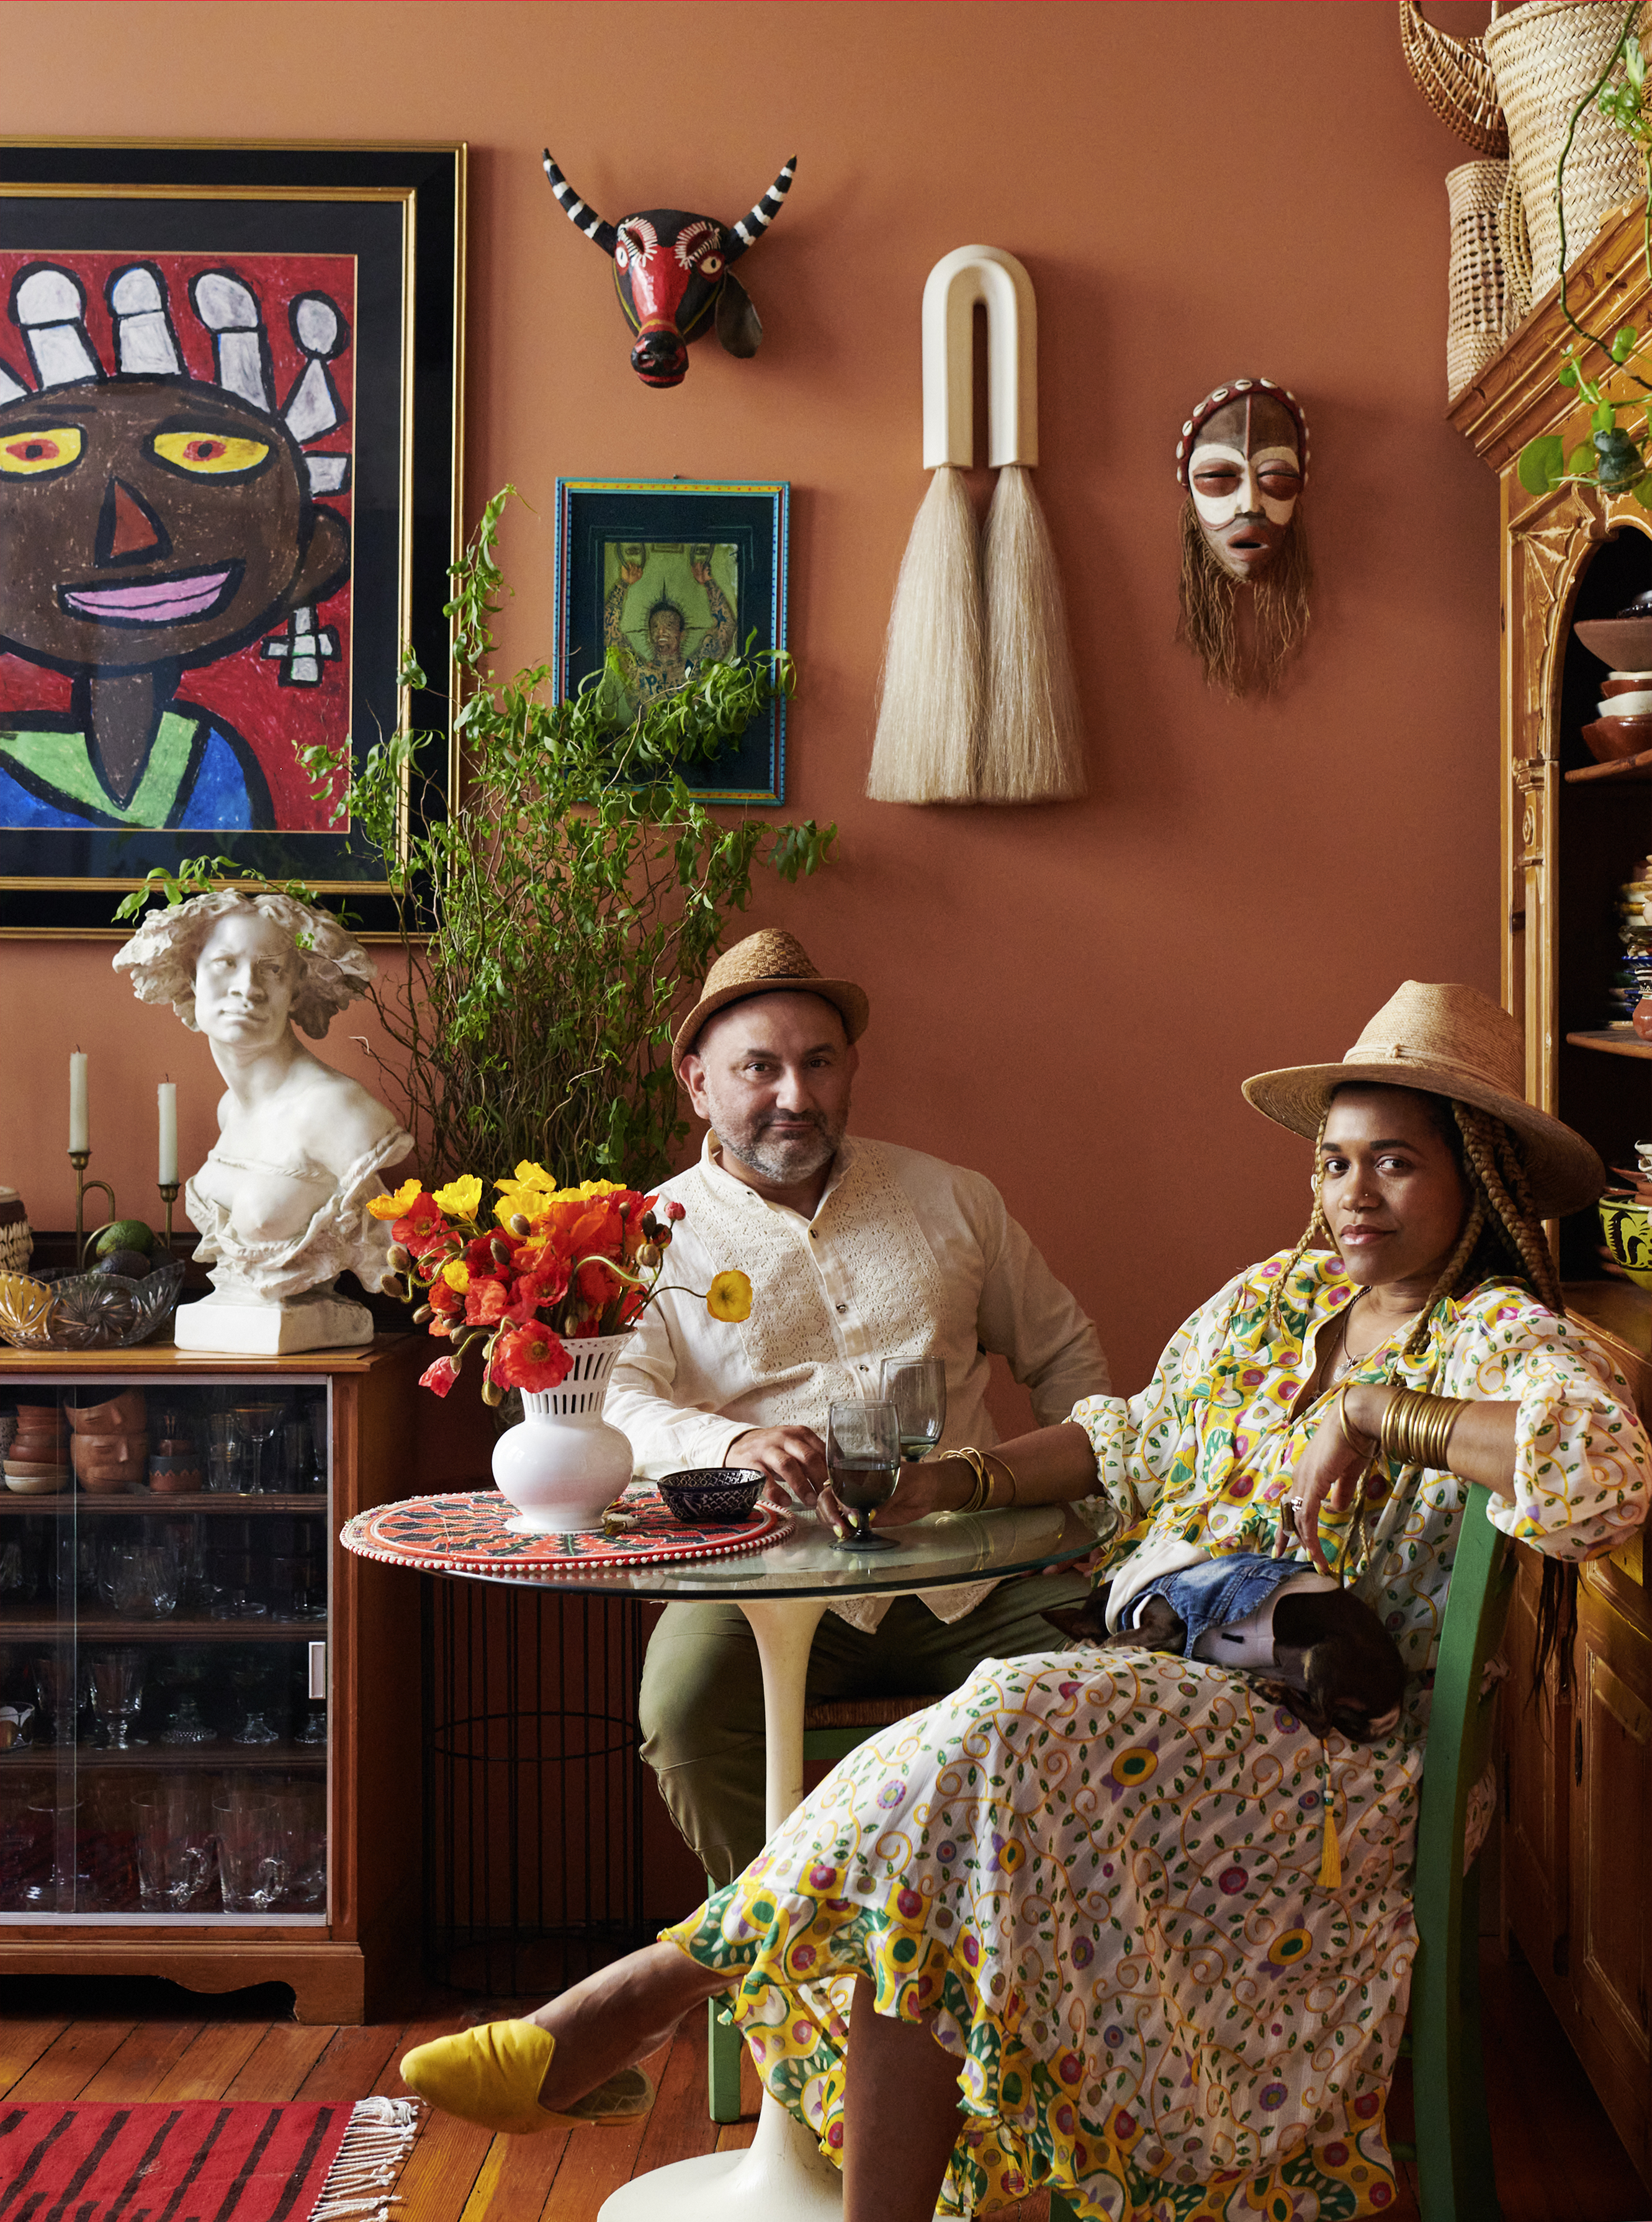 Two individuals in hats sit at a round table with flowers, in a colorful room adorned with art, masks, plants, and sculptures, creating an eclectic ambiance.